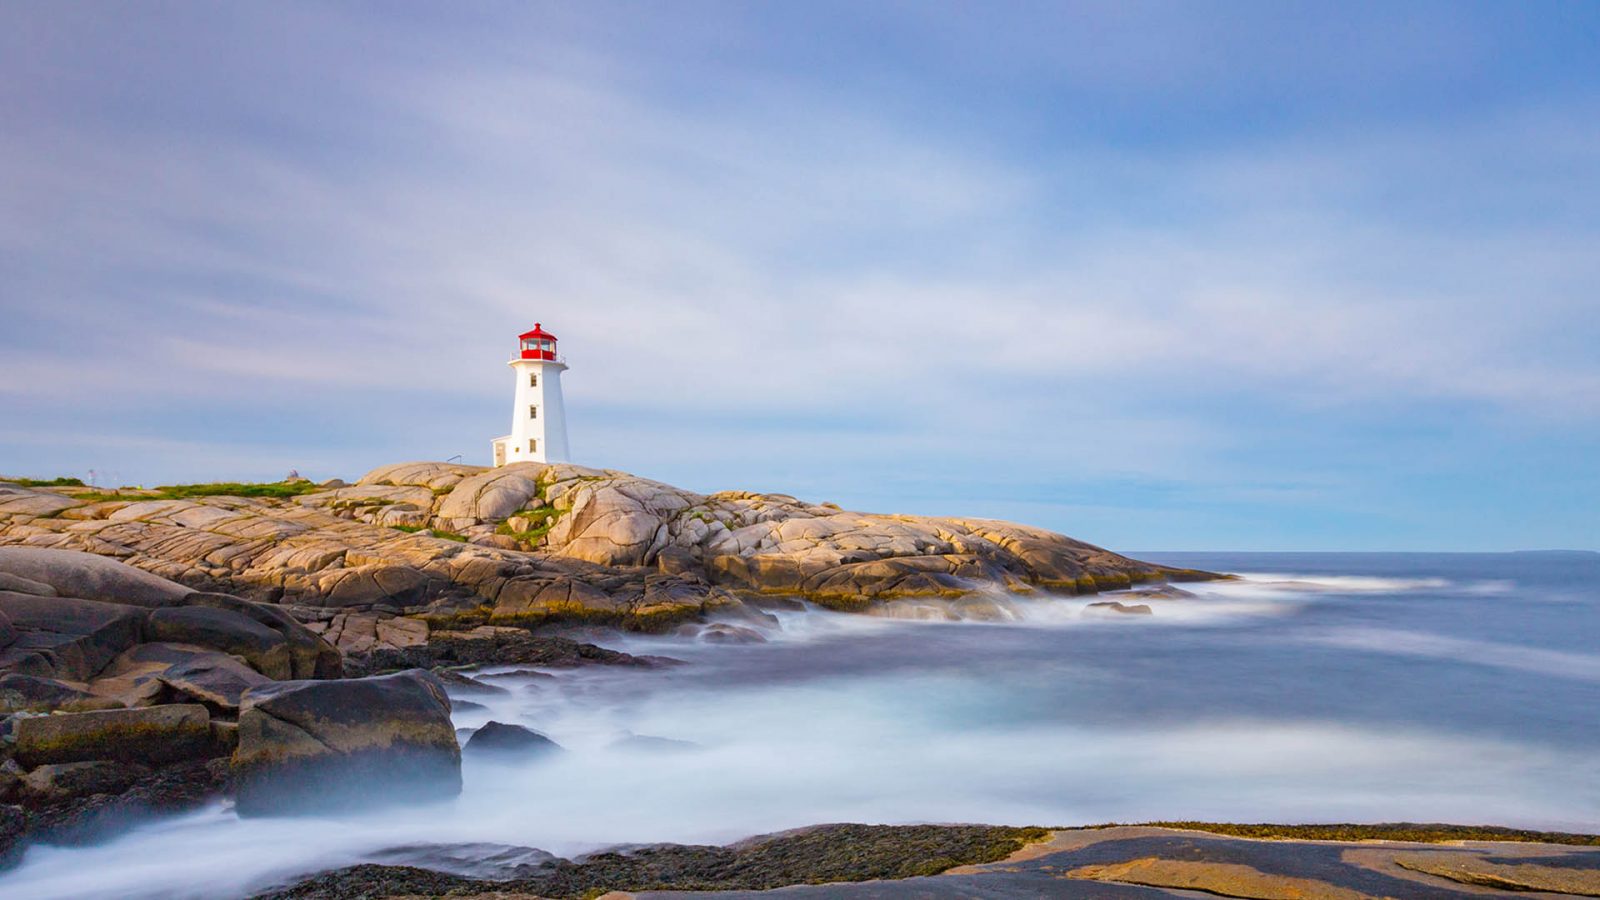 Do You Have Smarts to Pass This World Geography Quiz With Flying Colors ? Peggys Point Lighthouse, Peggy's Cove, Nova Scotia, Canada